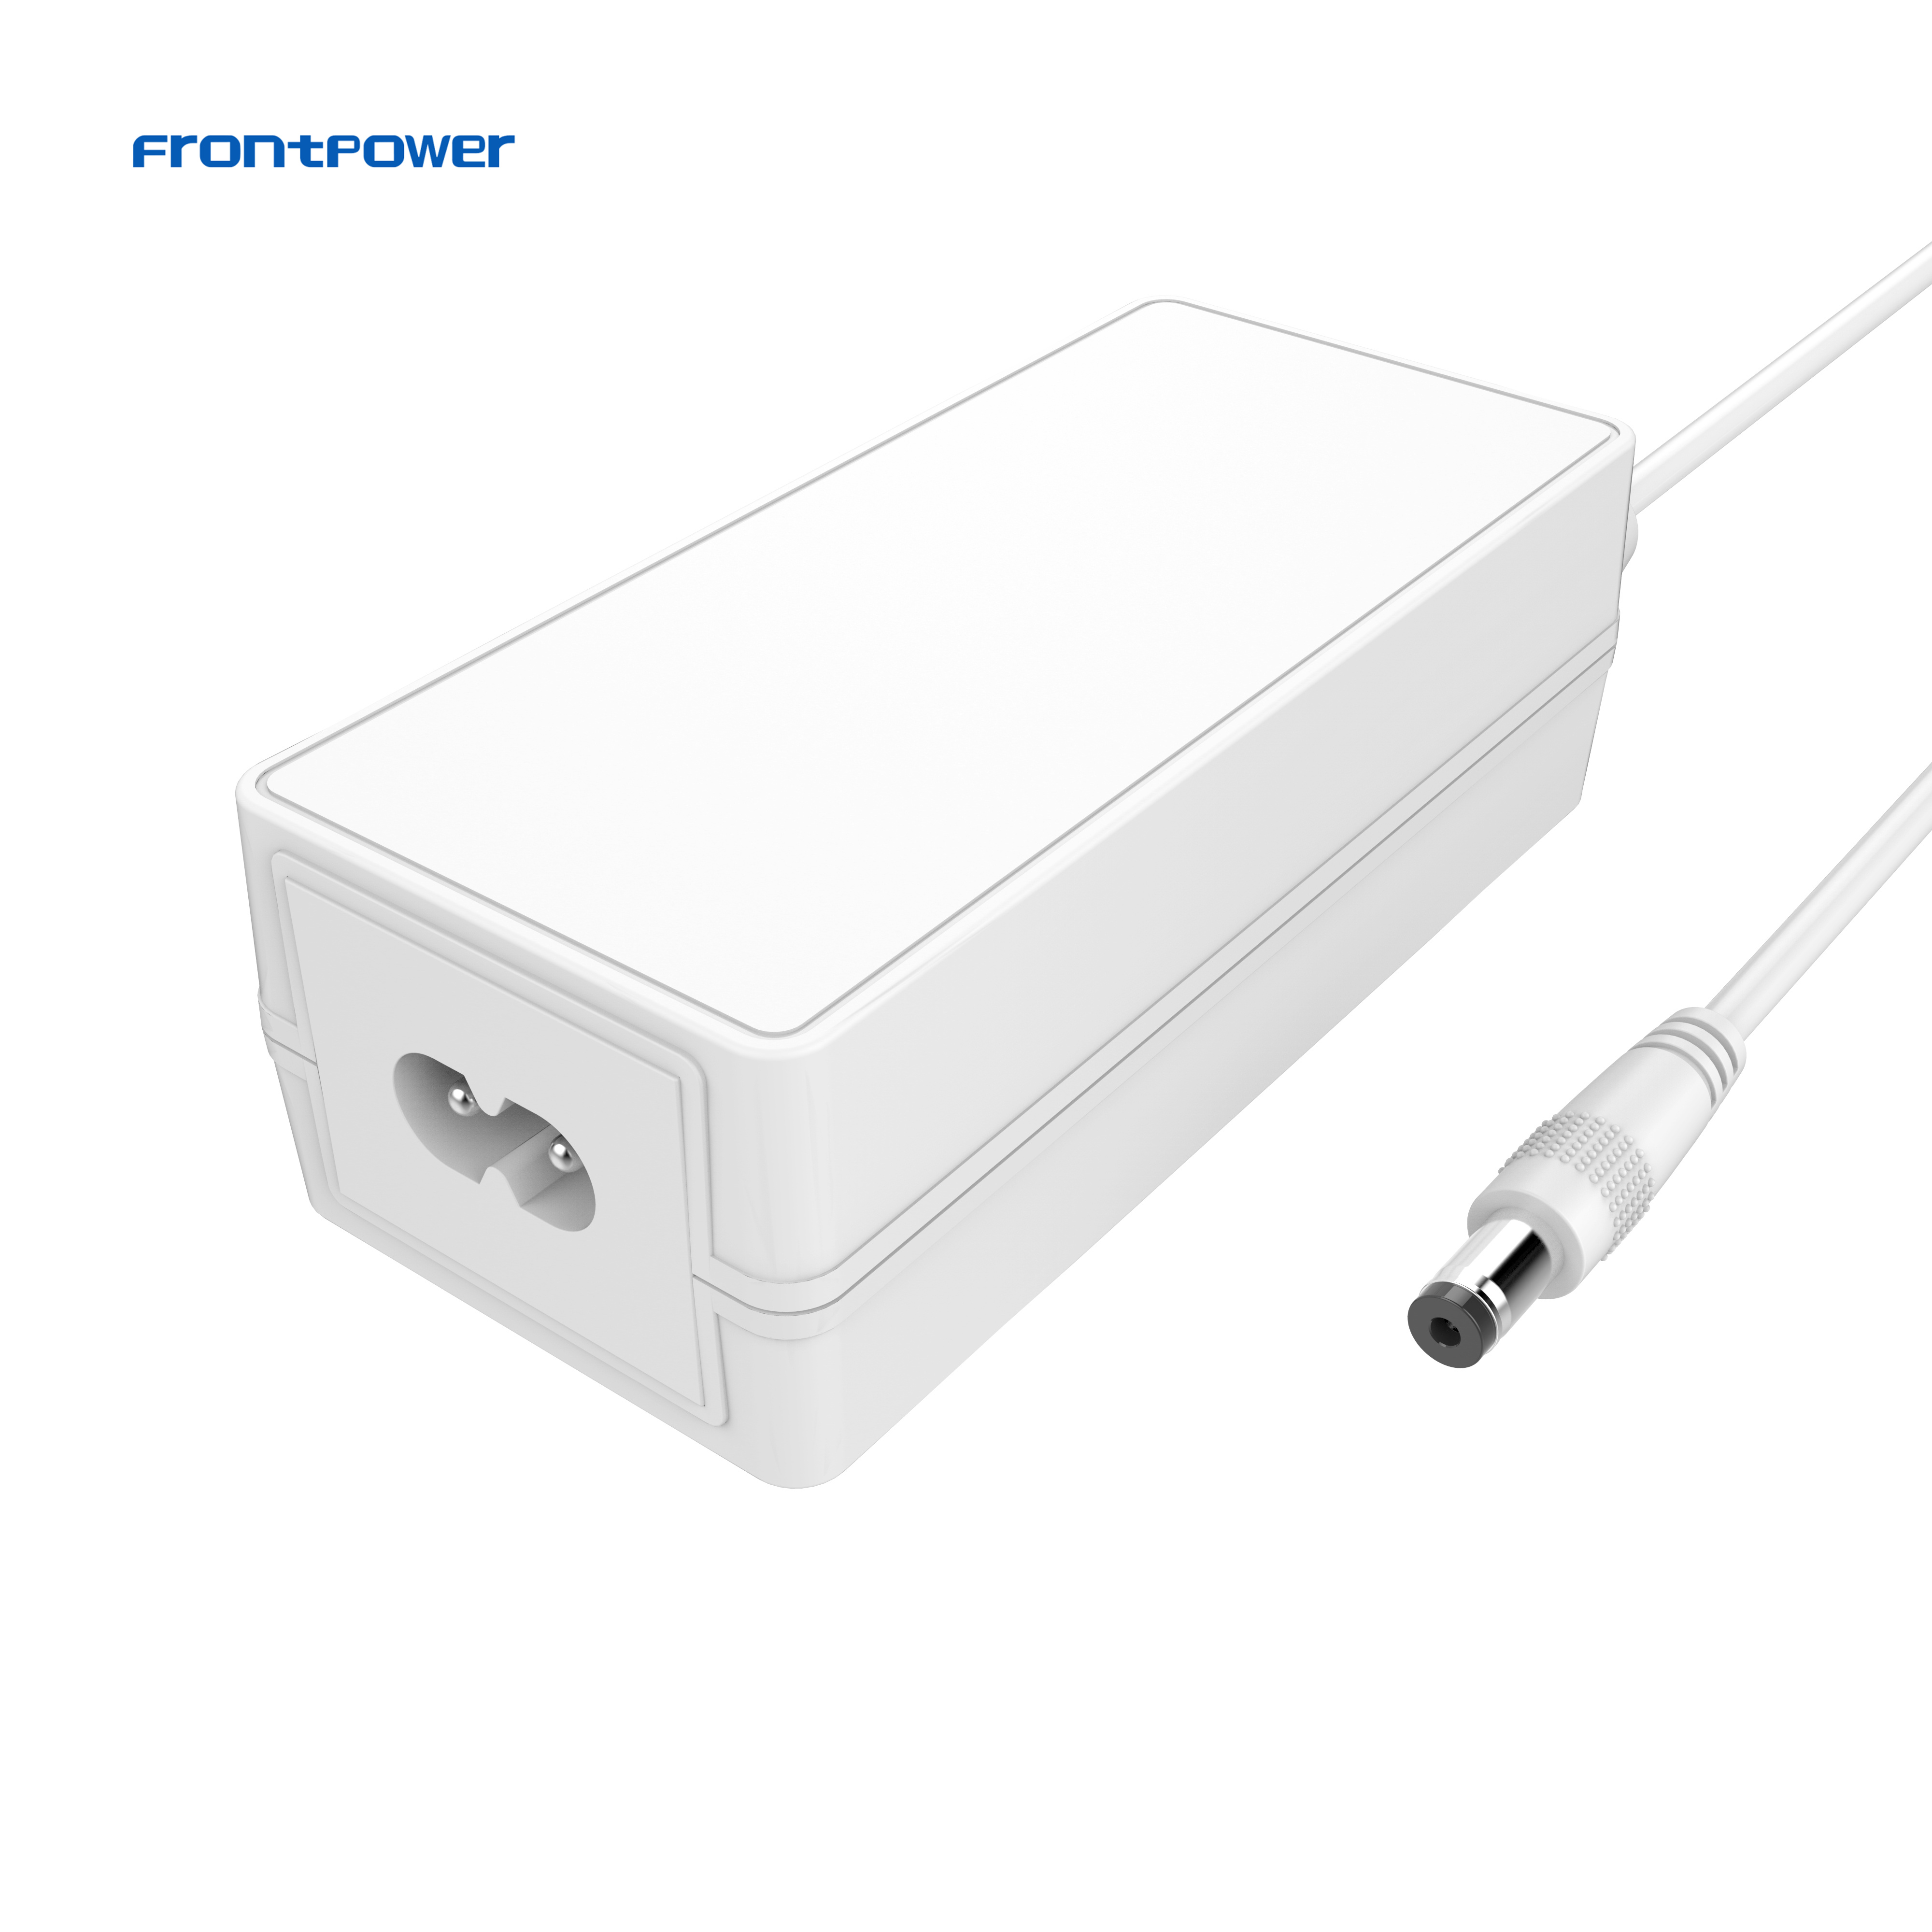 Table type power adapter 15v 2.4a laptop power supply with UL CB CE GS EMC SAA KC FCC PSE CCC for laptop